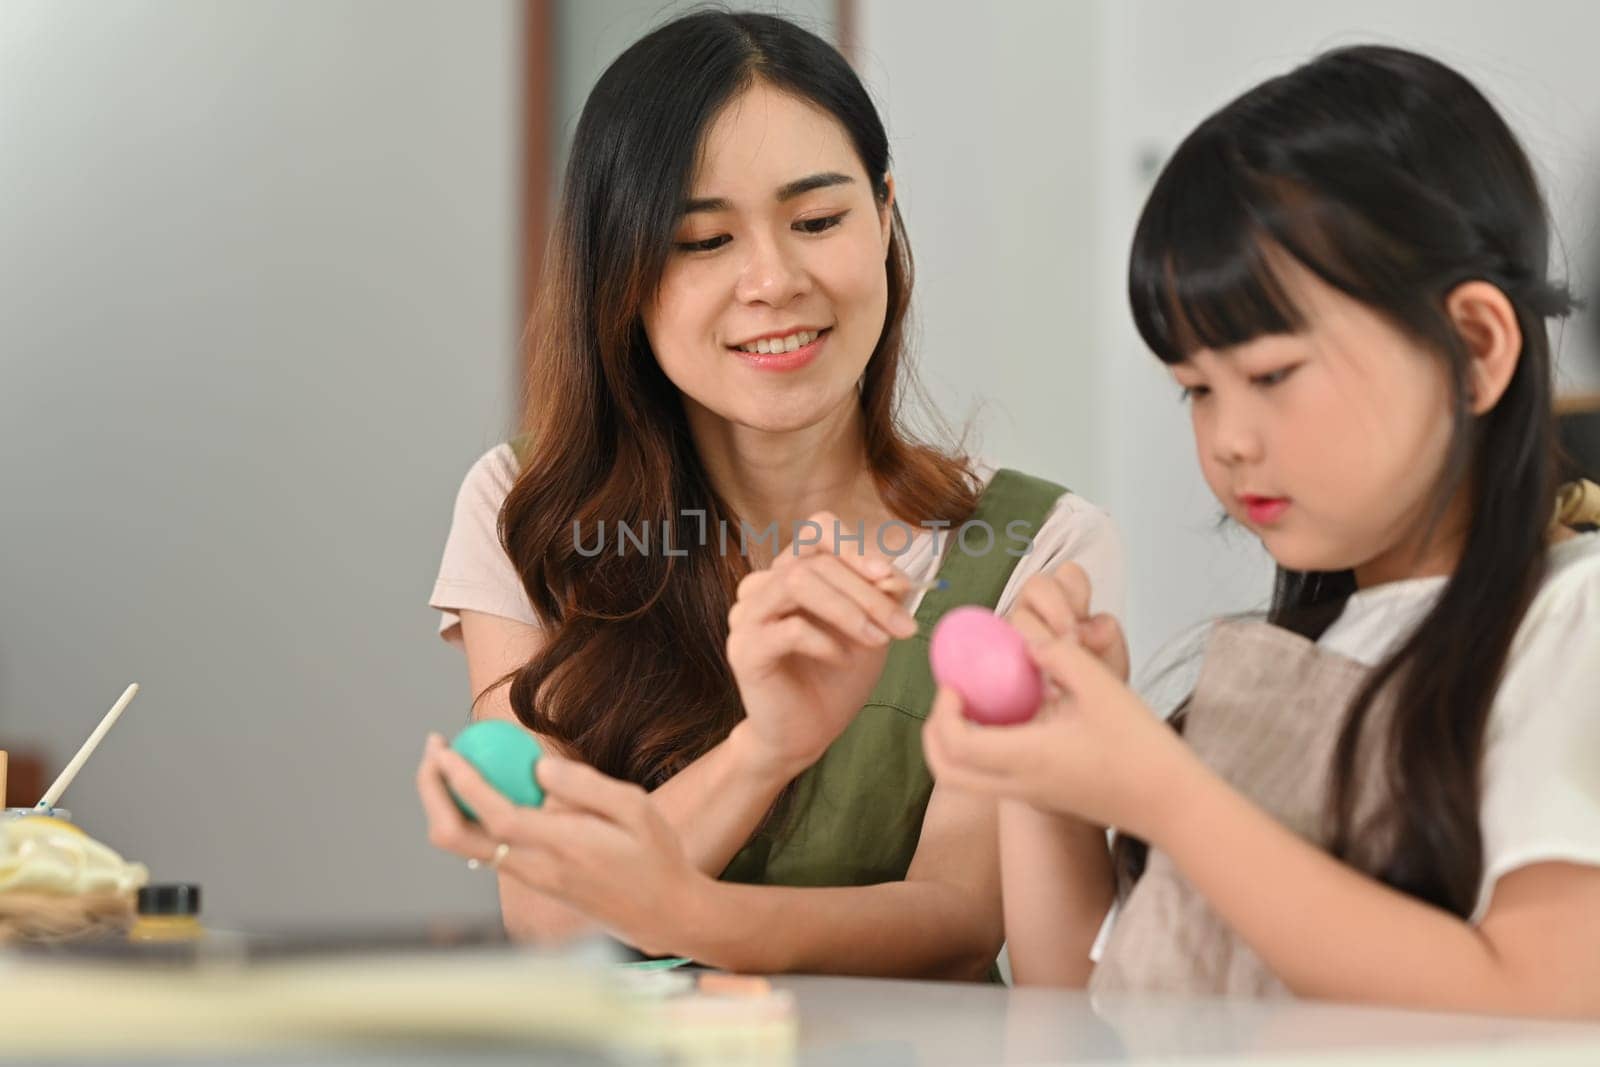 Smiling little girl painting Easter eggs with mother, getting ready for holiday at home by prathanchorruangsak